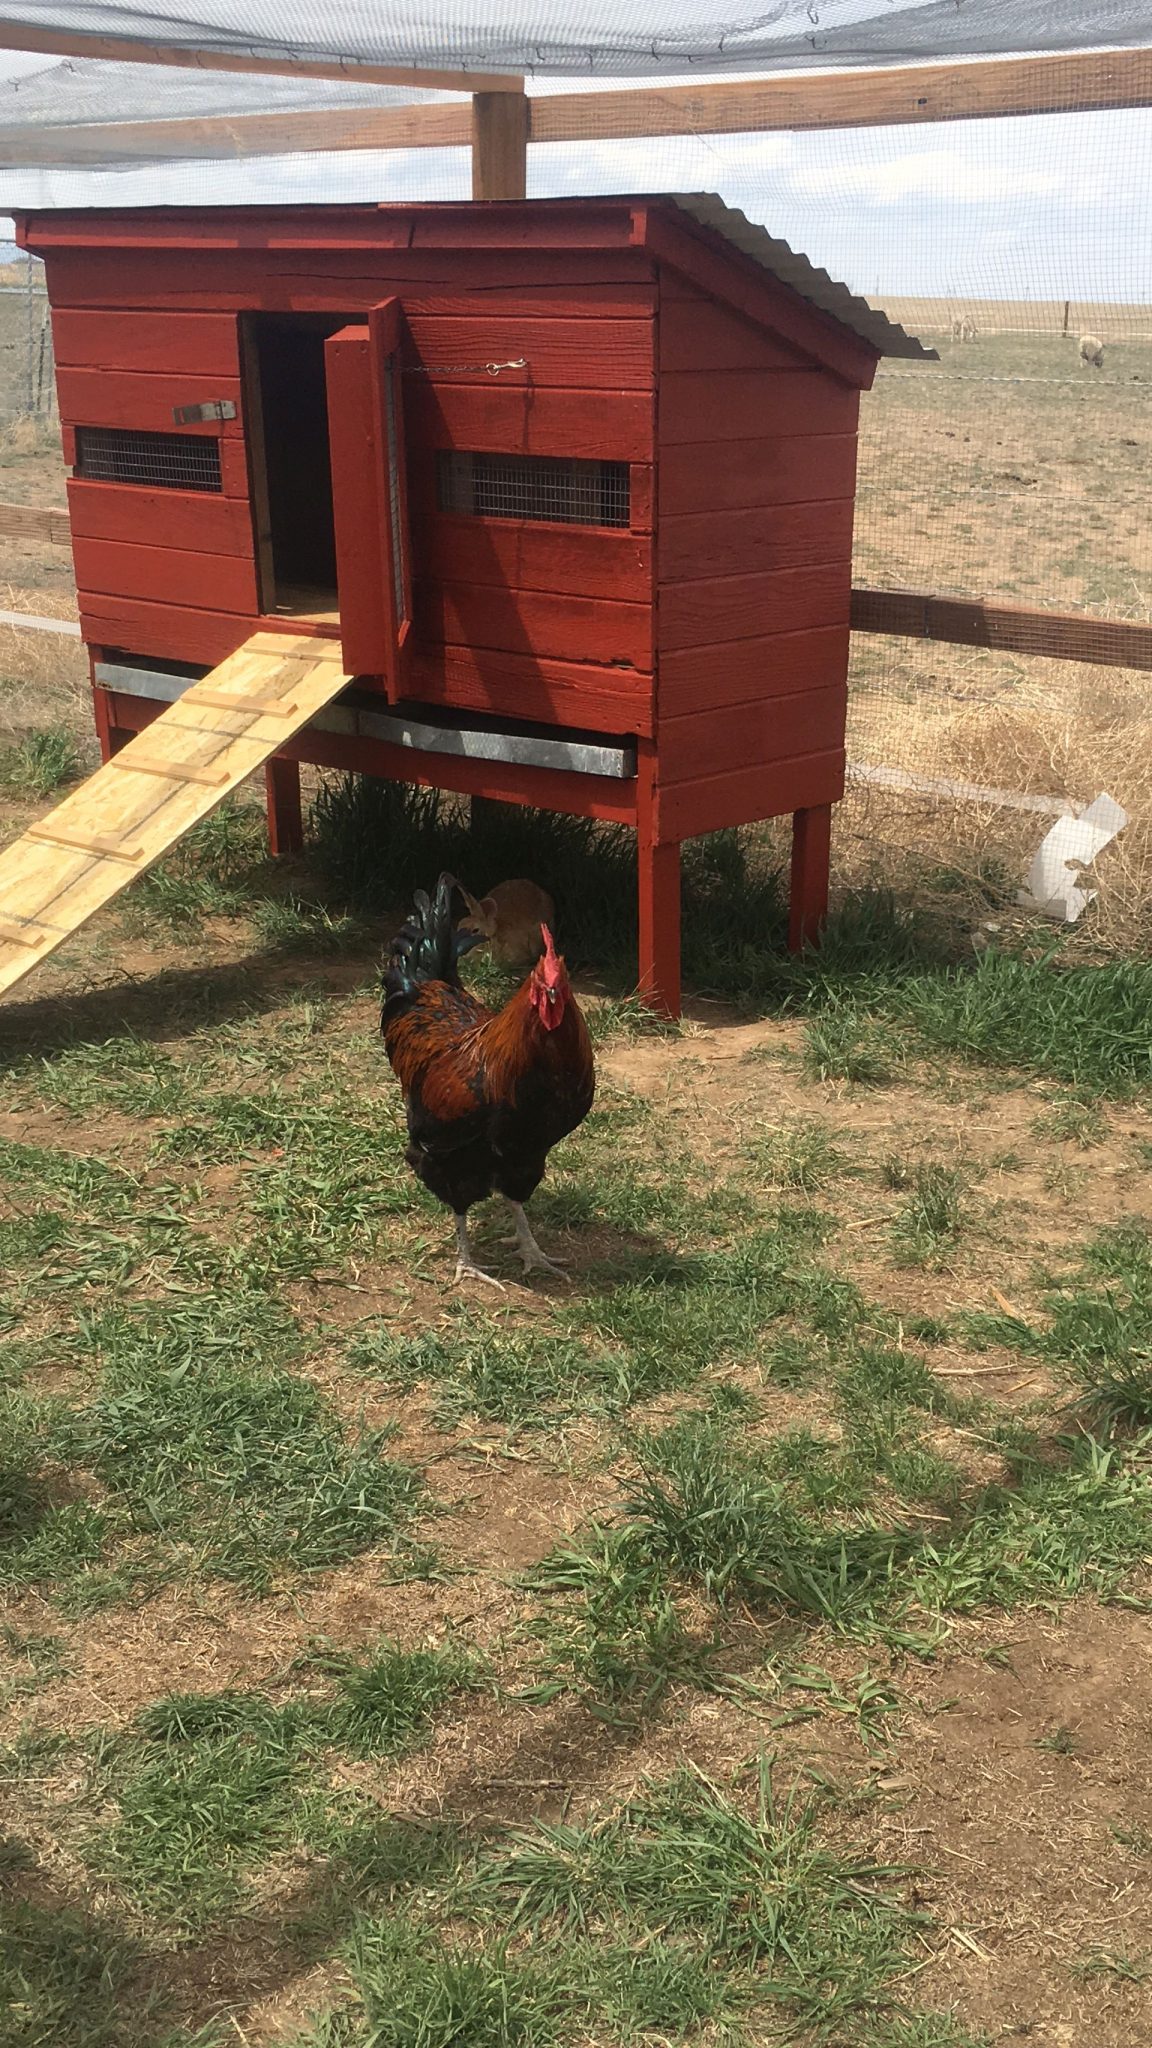 Chicken at the new coop enclosure